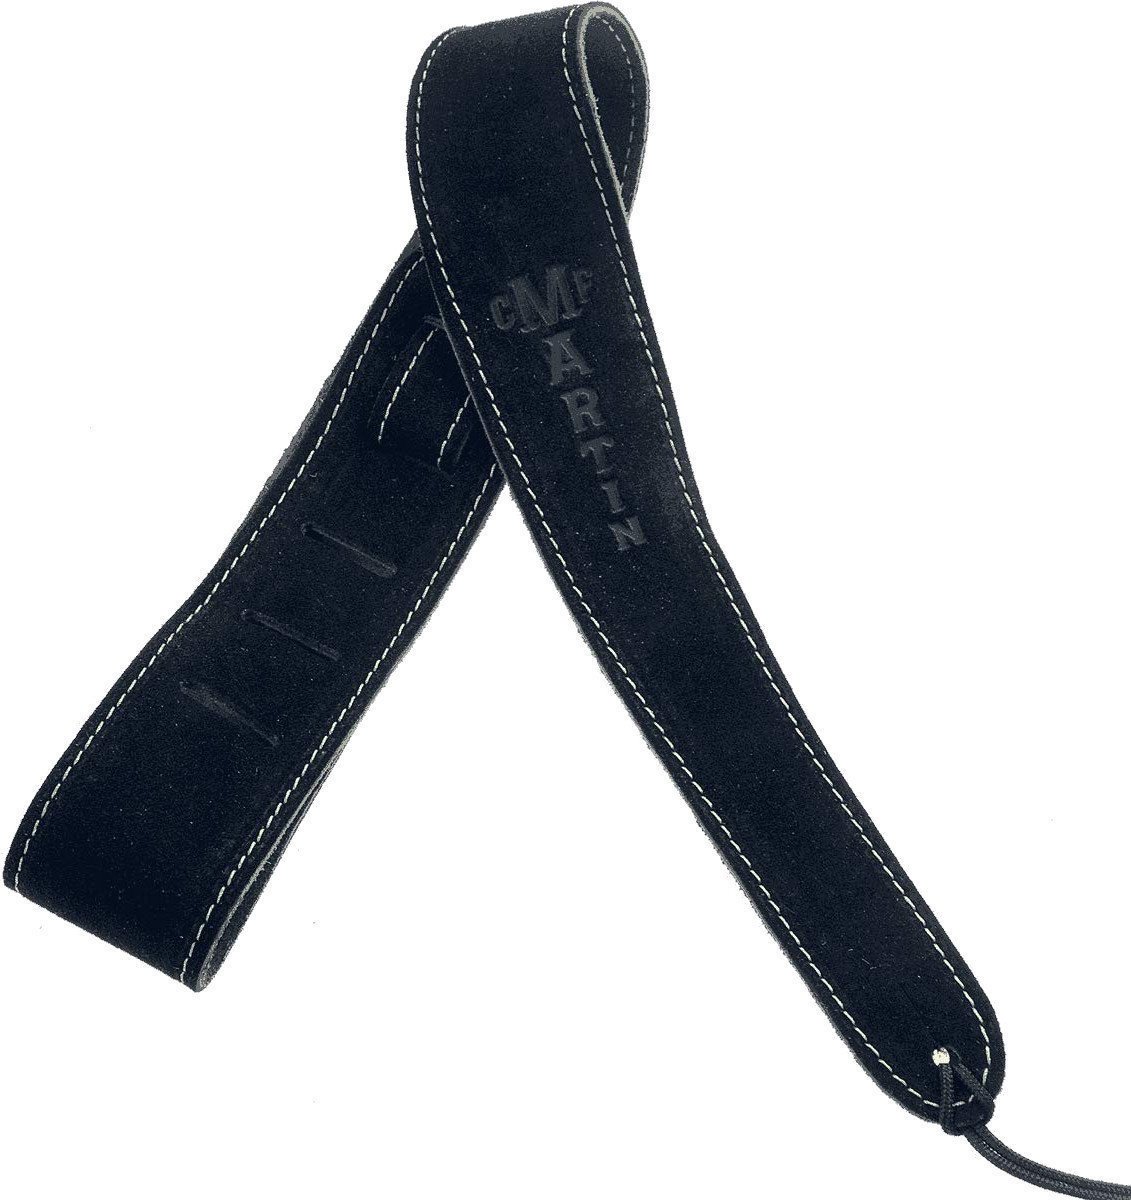 Leather guitar strap Martin 18A0016 Suede 2,5" Leather guitar strap Black